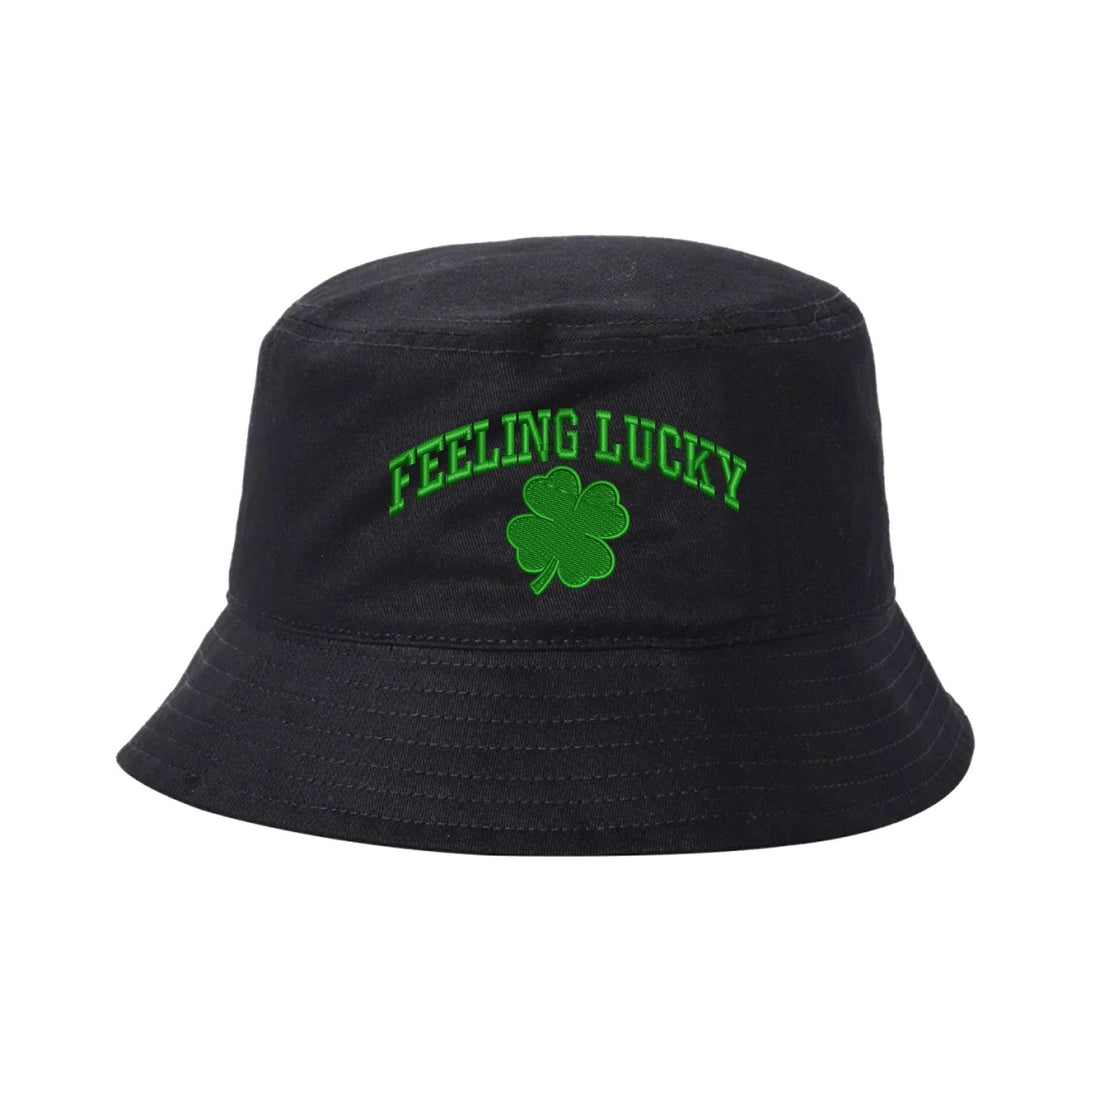 Black Bucket Hat embroidered with Feeling Lucky - DSY Lifestyle